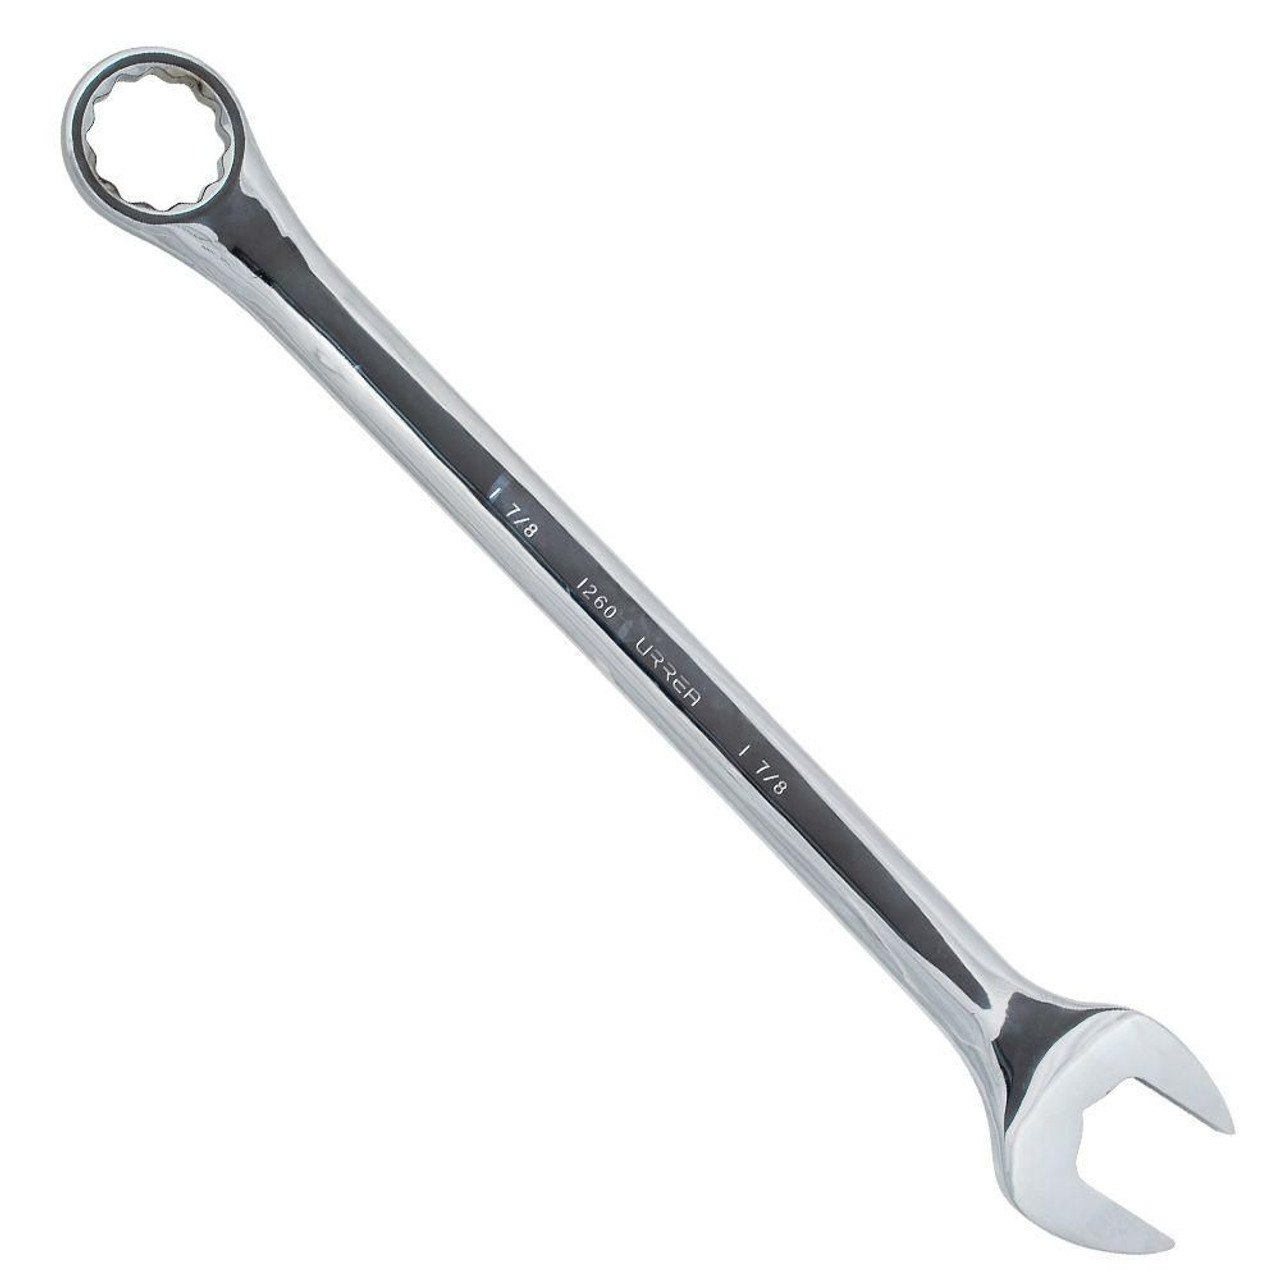 Full polished combination wrench, Size: 1-7/16, 12 point, Tool Length:&nbsp;19-7/16"